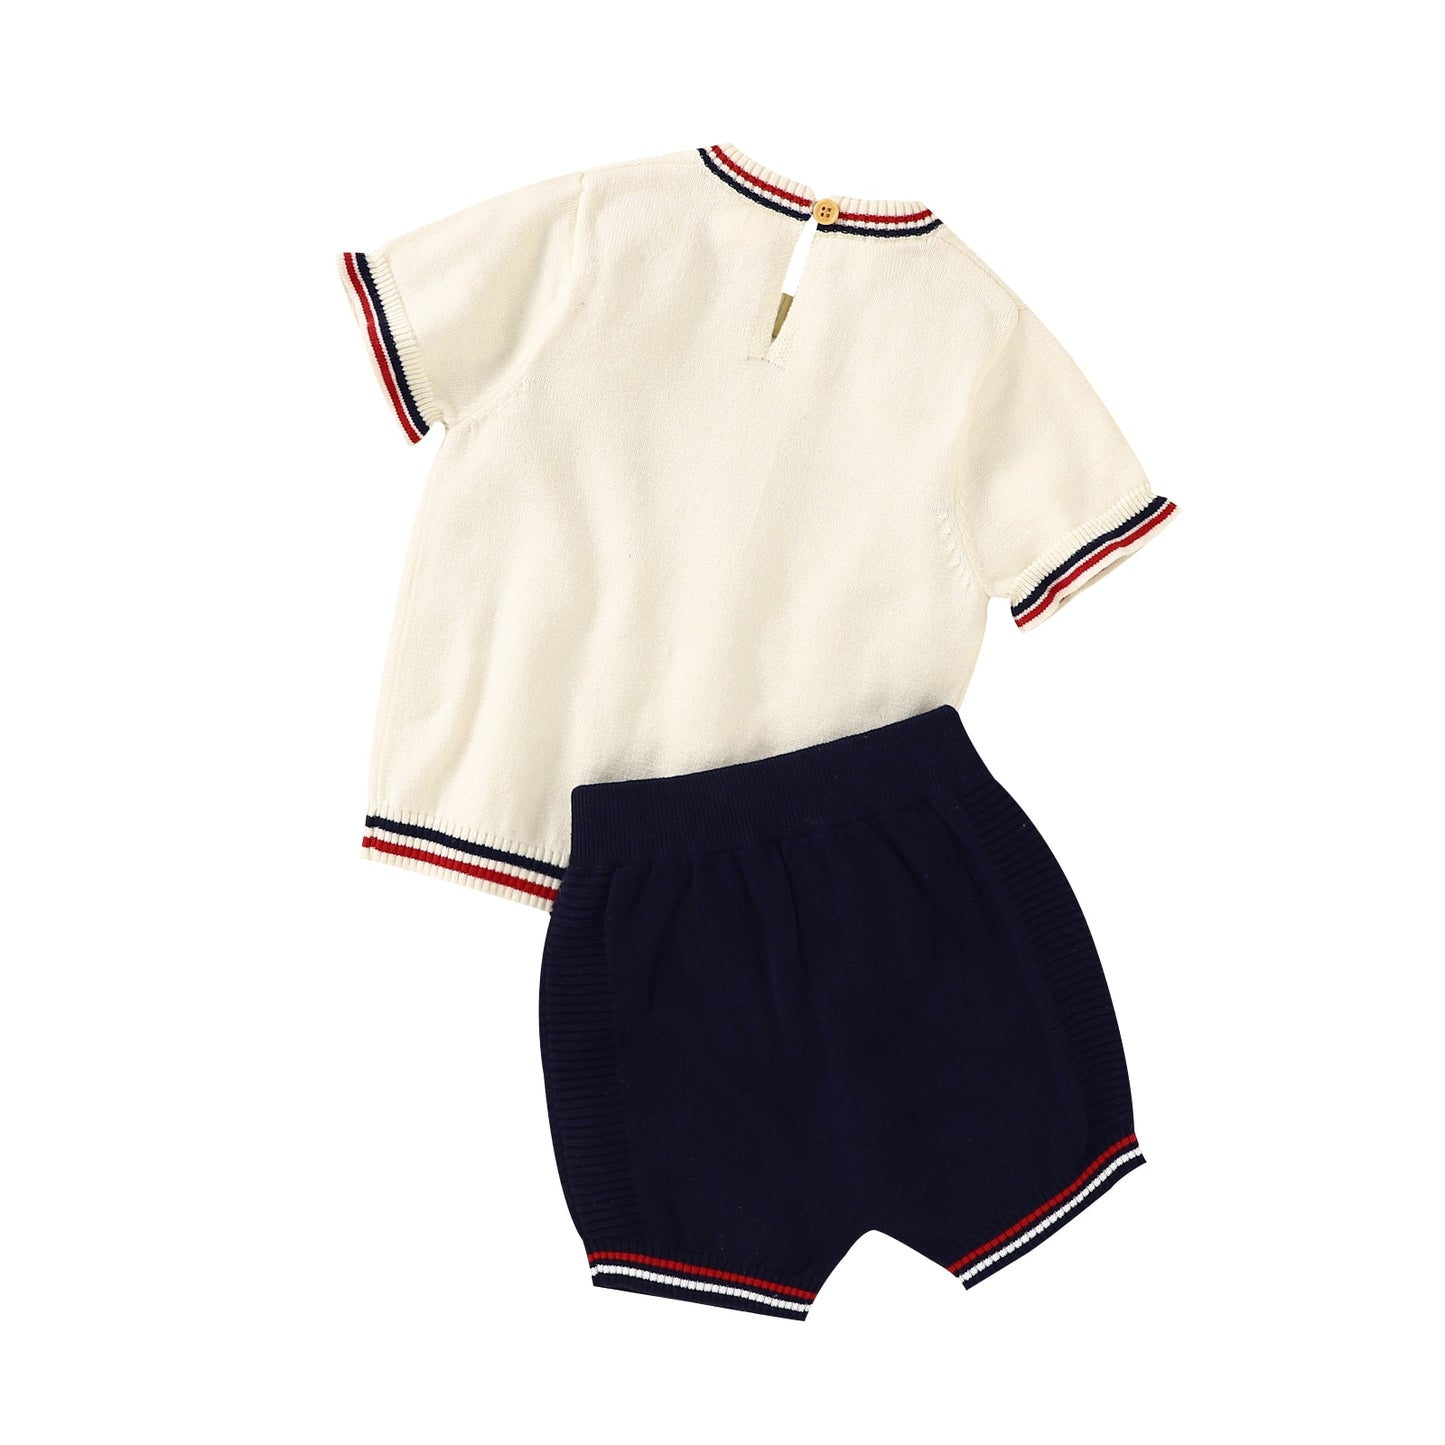 Baby Boys Girls Summer 2pcs Short Sleeve Cotton Outfit, Top + Shorts - Cream, Navy.